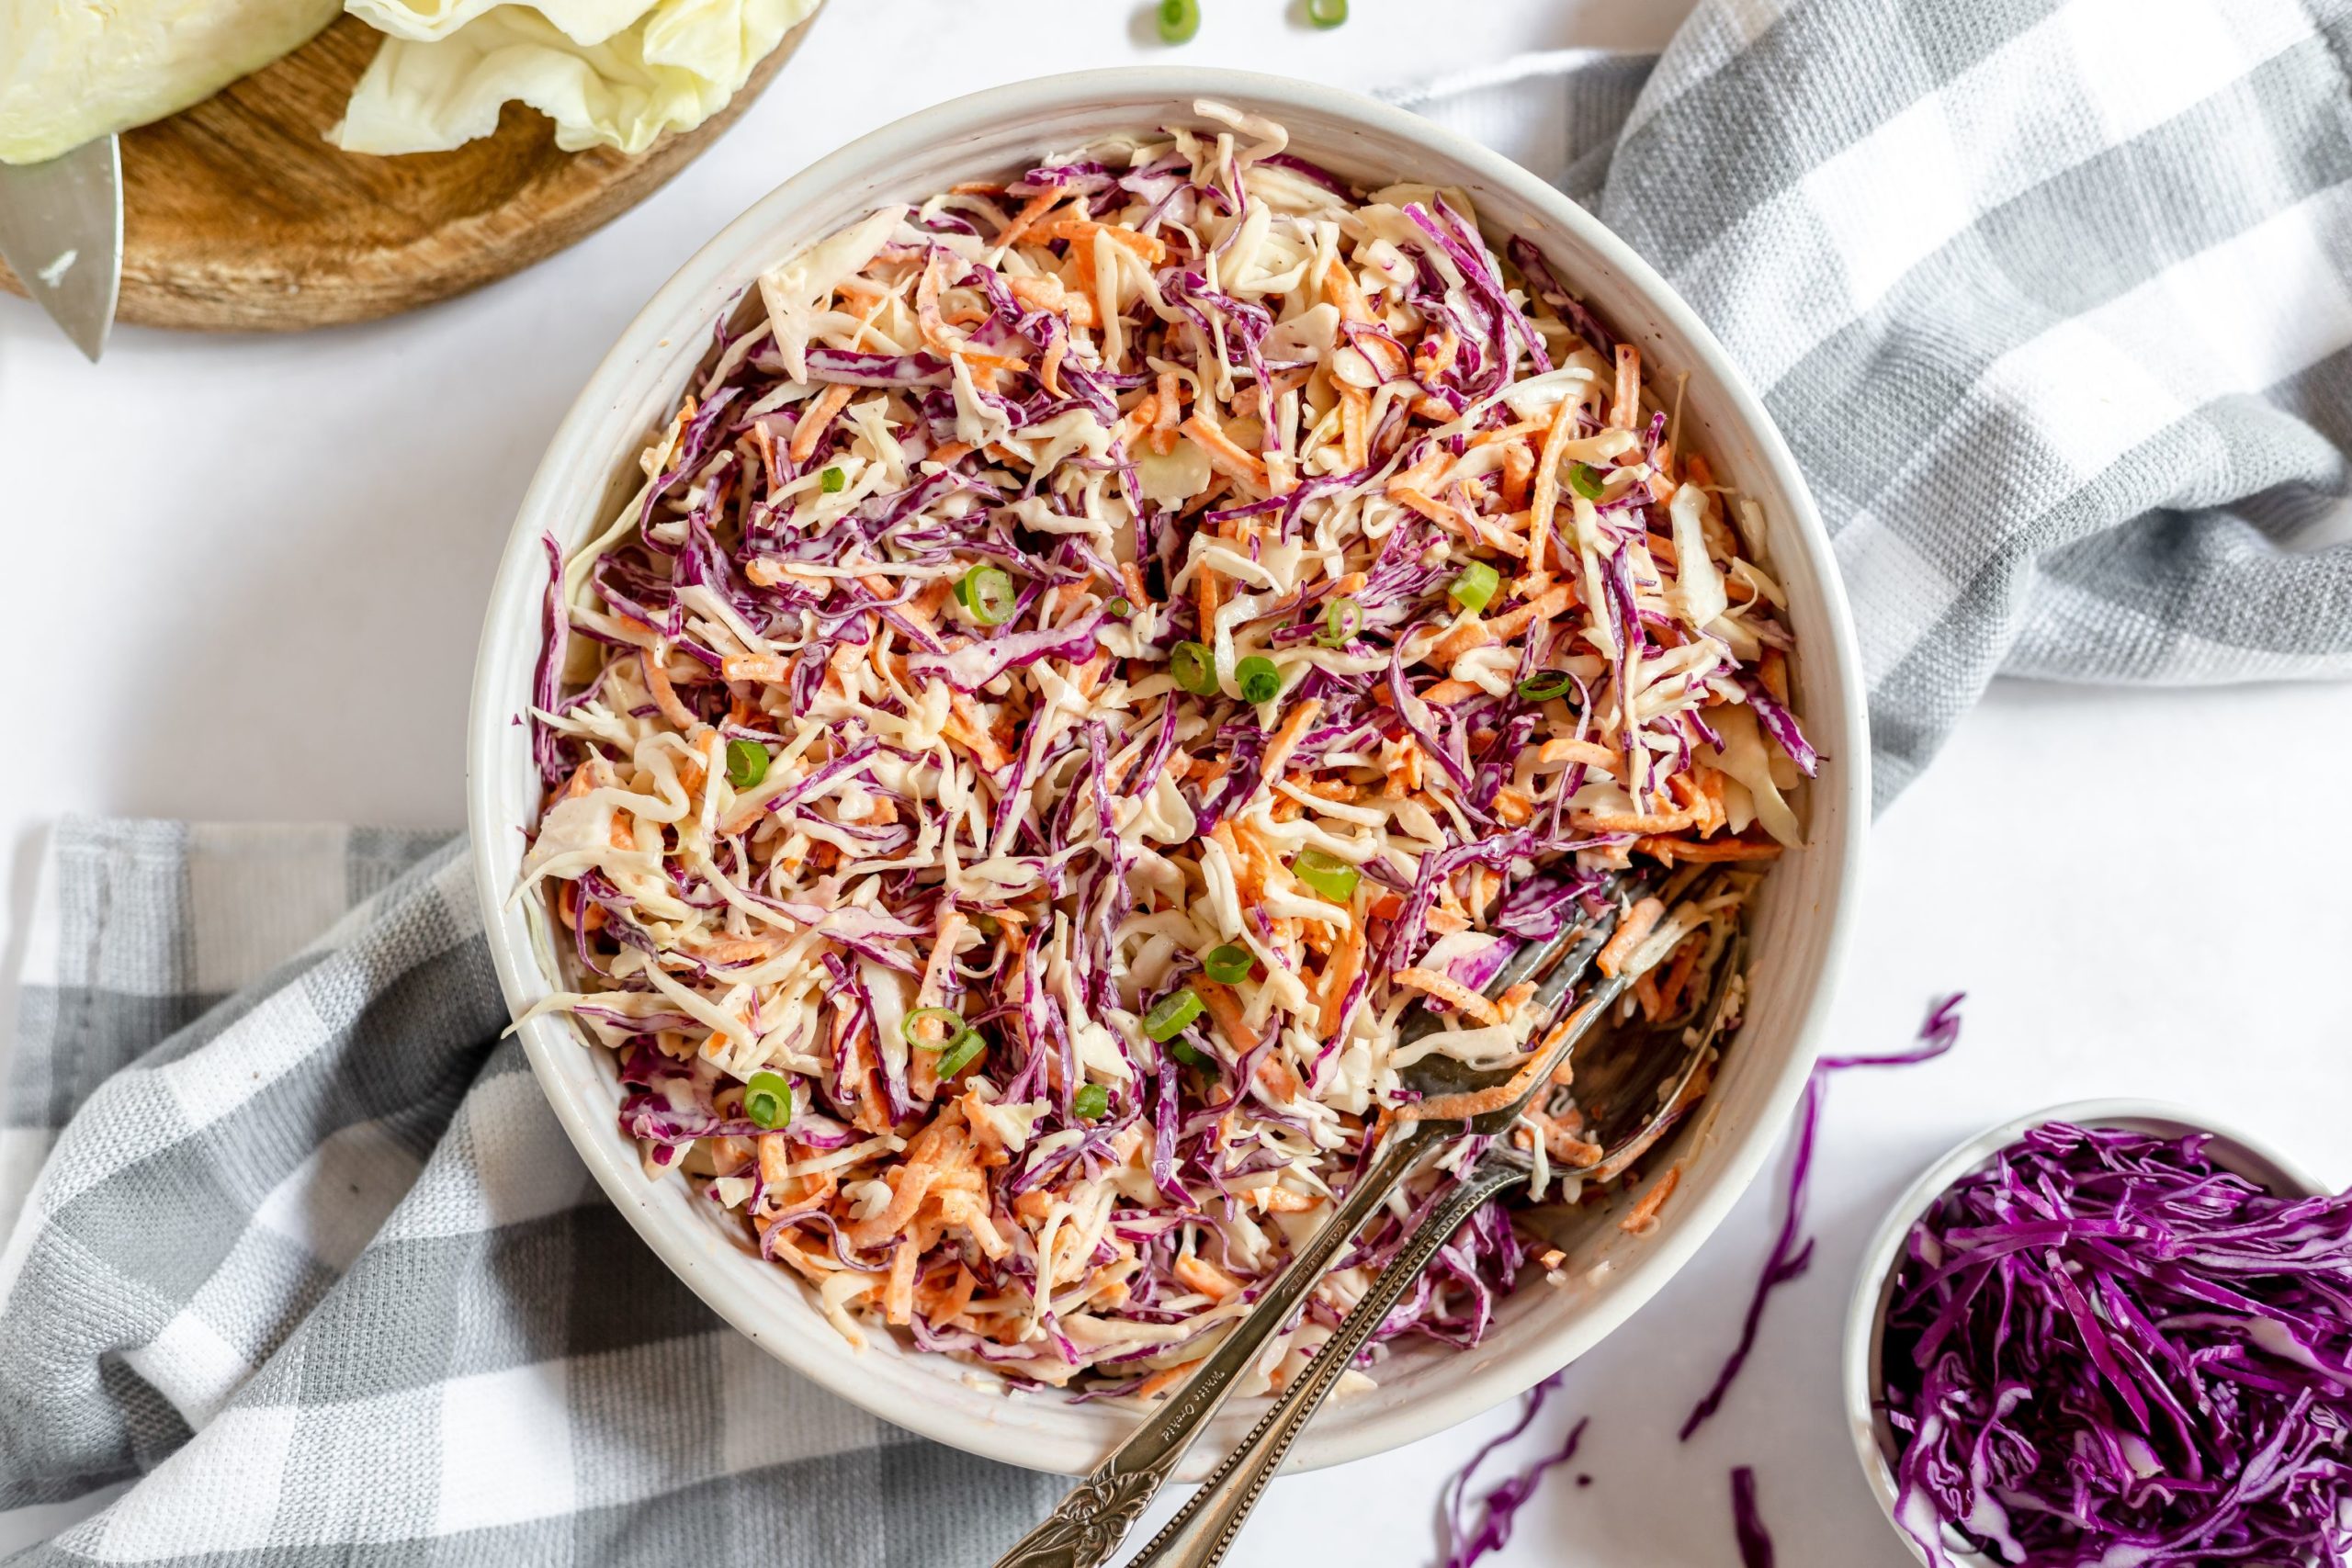 A top shot of the slaw.